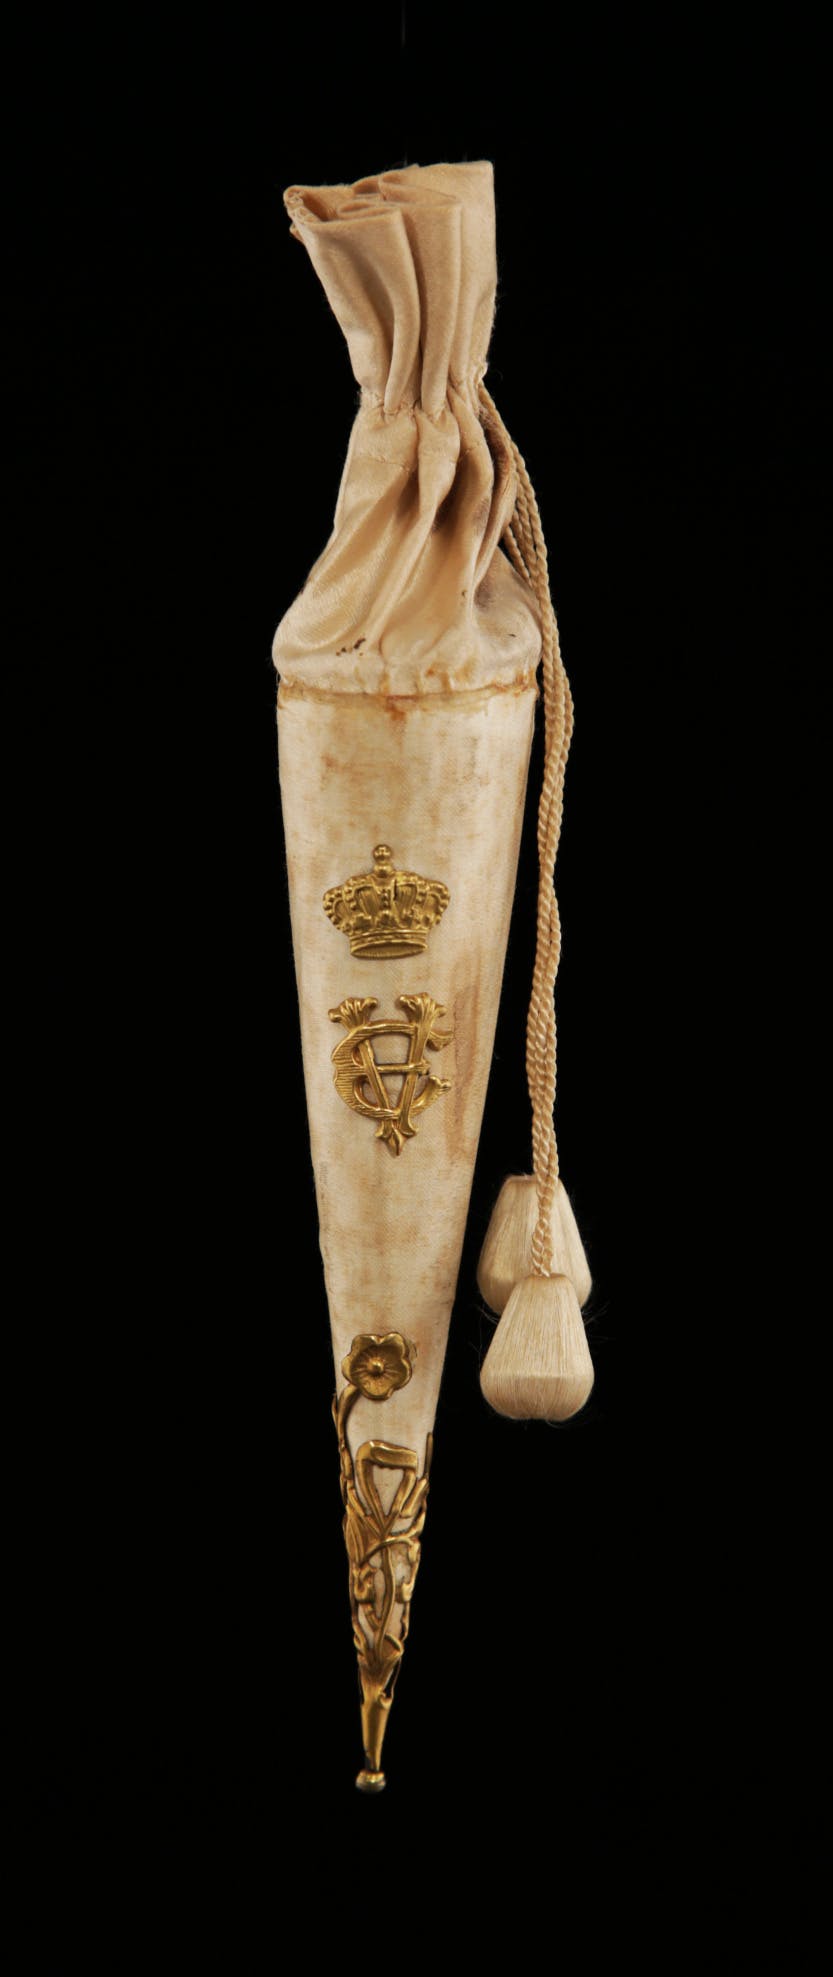 Photographed on a black background. A gold confetti bag with tassel for the wedding of Princess Victoria Eugenie of Battenberg (1887-1969).

This silk and gilt cone of rice confetti, with the initials VE adorning the side, is thought to have belonged to a bridesmaid of Victoria Eugenie of Battenberg and carried at the wedding. The confetti is still inside as tragedy struck the wedding procession when an anarchist threw a bomb at the royal carriage and an outrider was killed. Victoria Eugenia was a granddaughter of Queen Victoria. She was Queen Consort of Spain as the wife of King of Spain Alfonso XIII of Bourbon, whom she married on 31 May 1906.